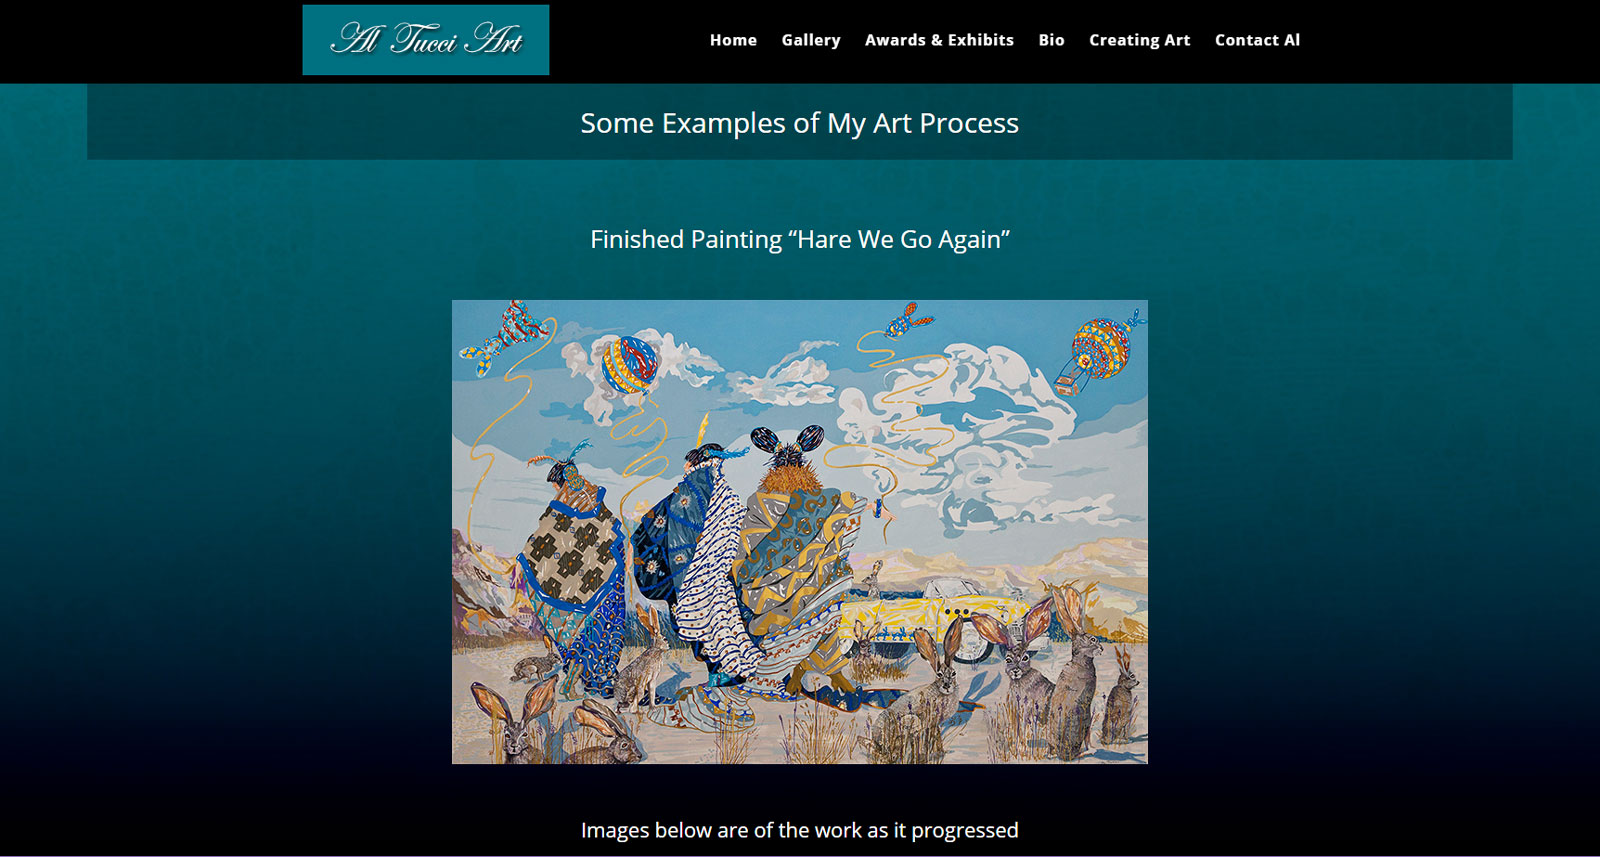 dark teal background with blanketed figures in the foreground, rabbits all over Art in progress by Al Tucci on his new website